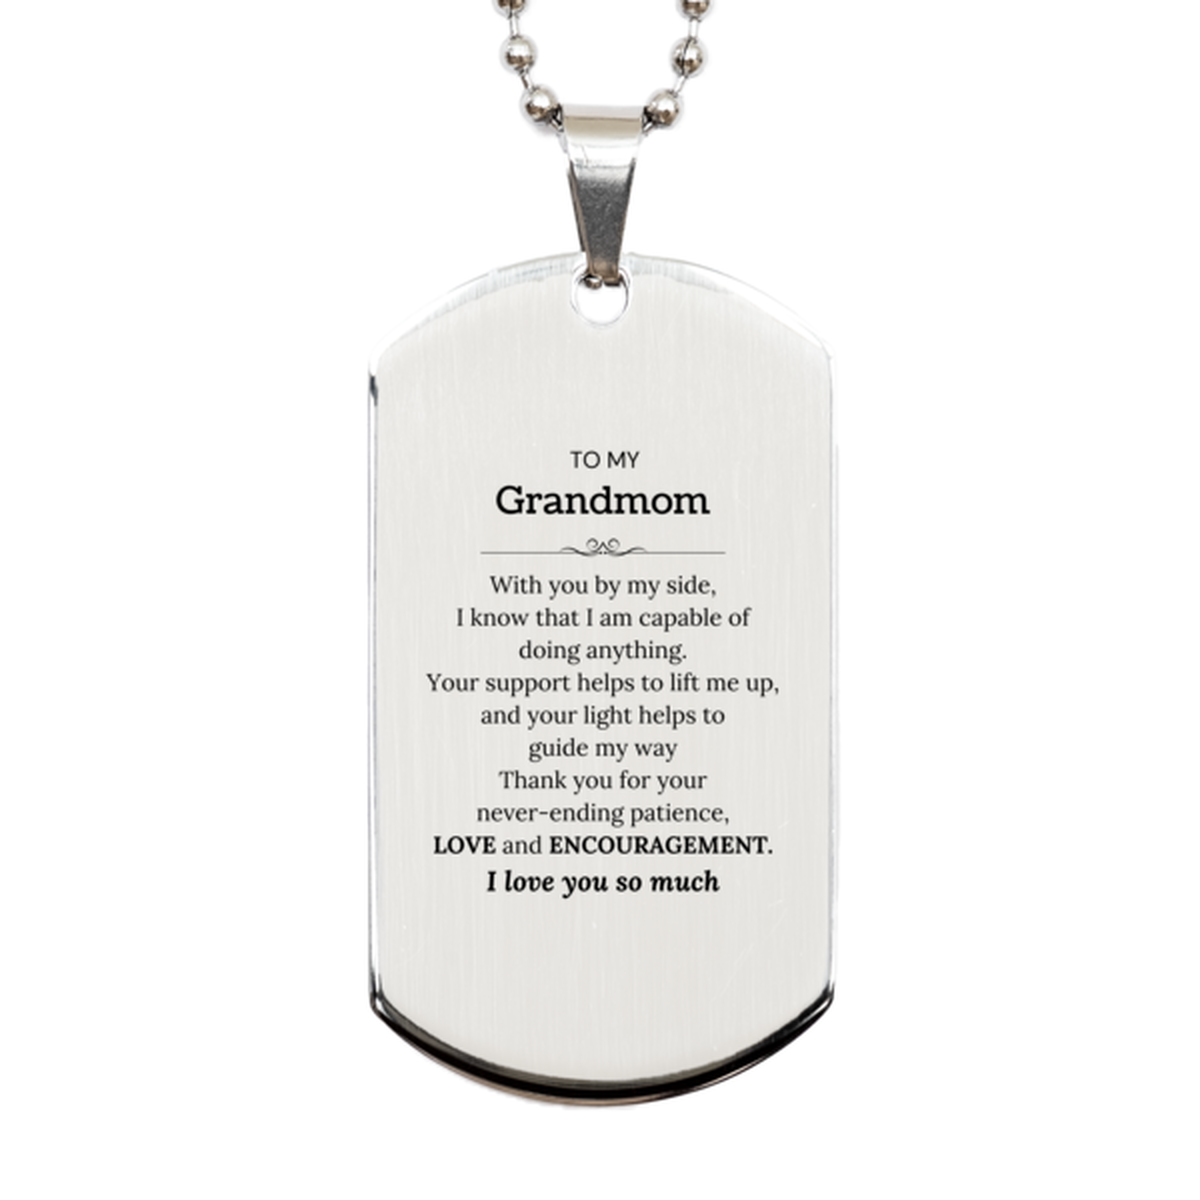 Appreciation Grandmom Silver Dog Tag Gifts, To My Grandmom Birthday Christmas Wedding Keepsake Gifts for Grandmom With you by my side, I know that I am capable of doing anything. I love you so much